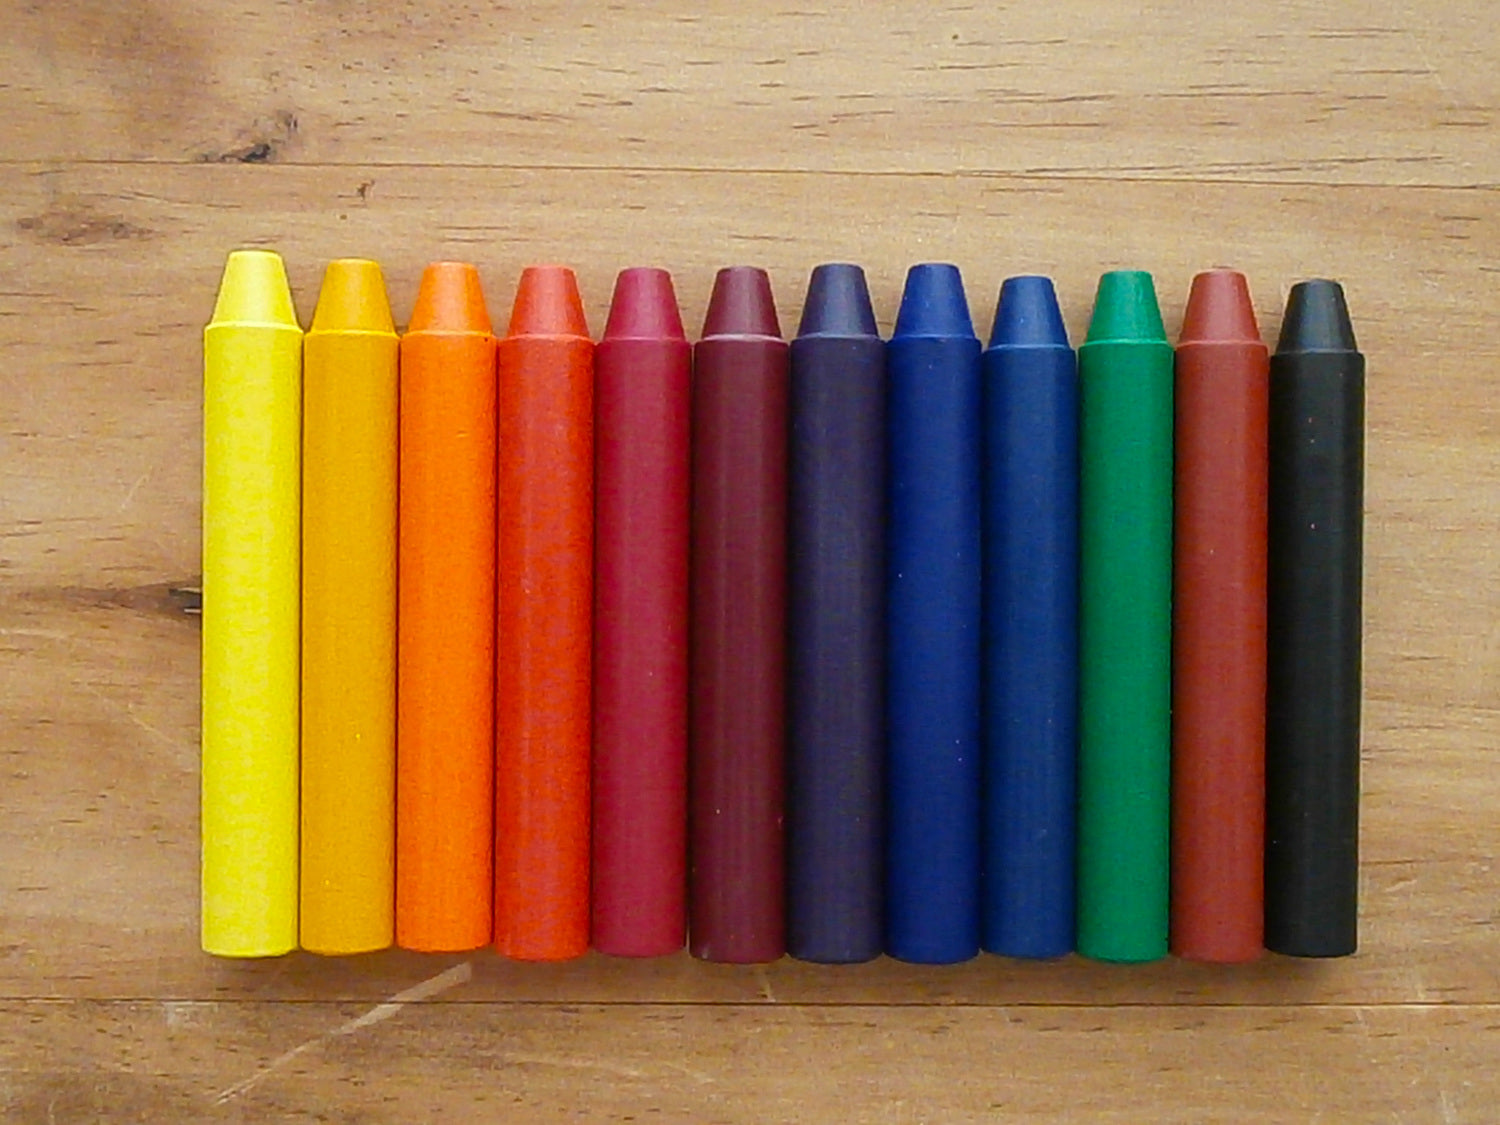 Photo of Filana - 12 Stick Crayons out of package